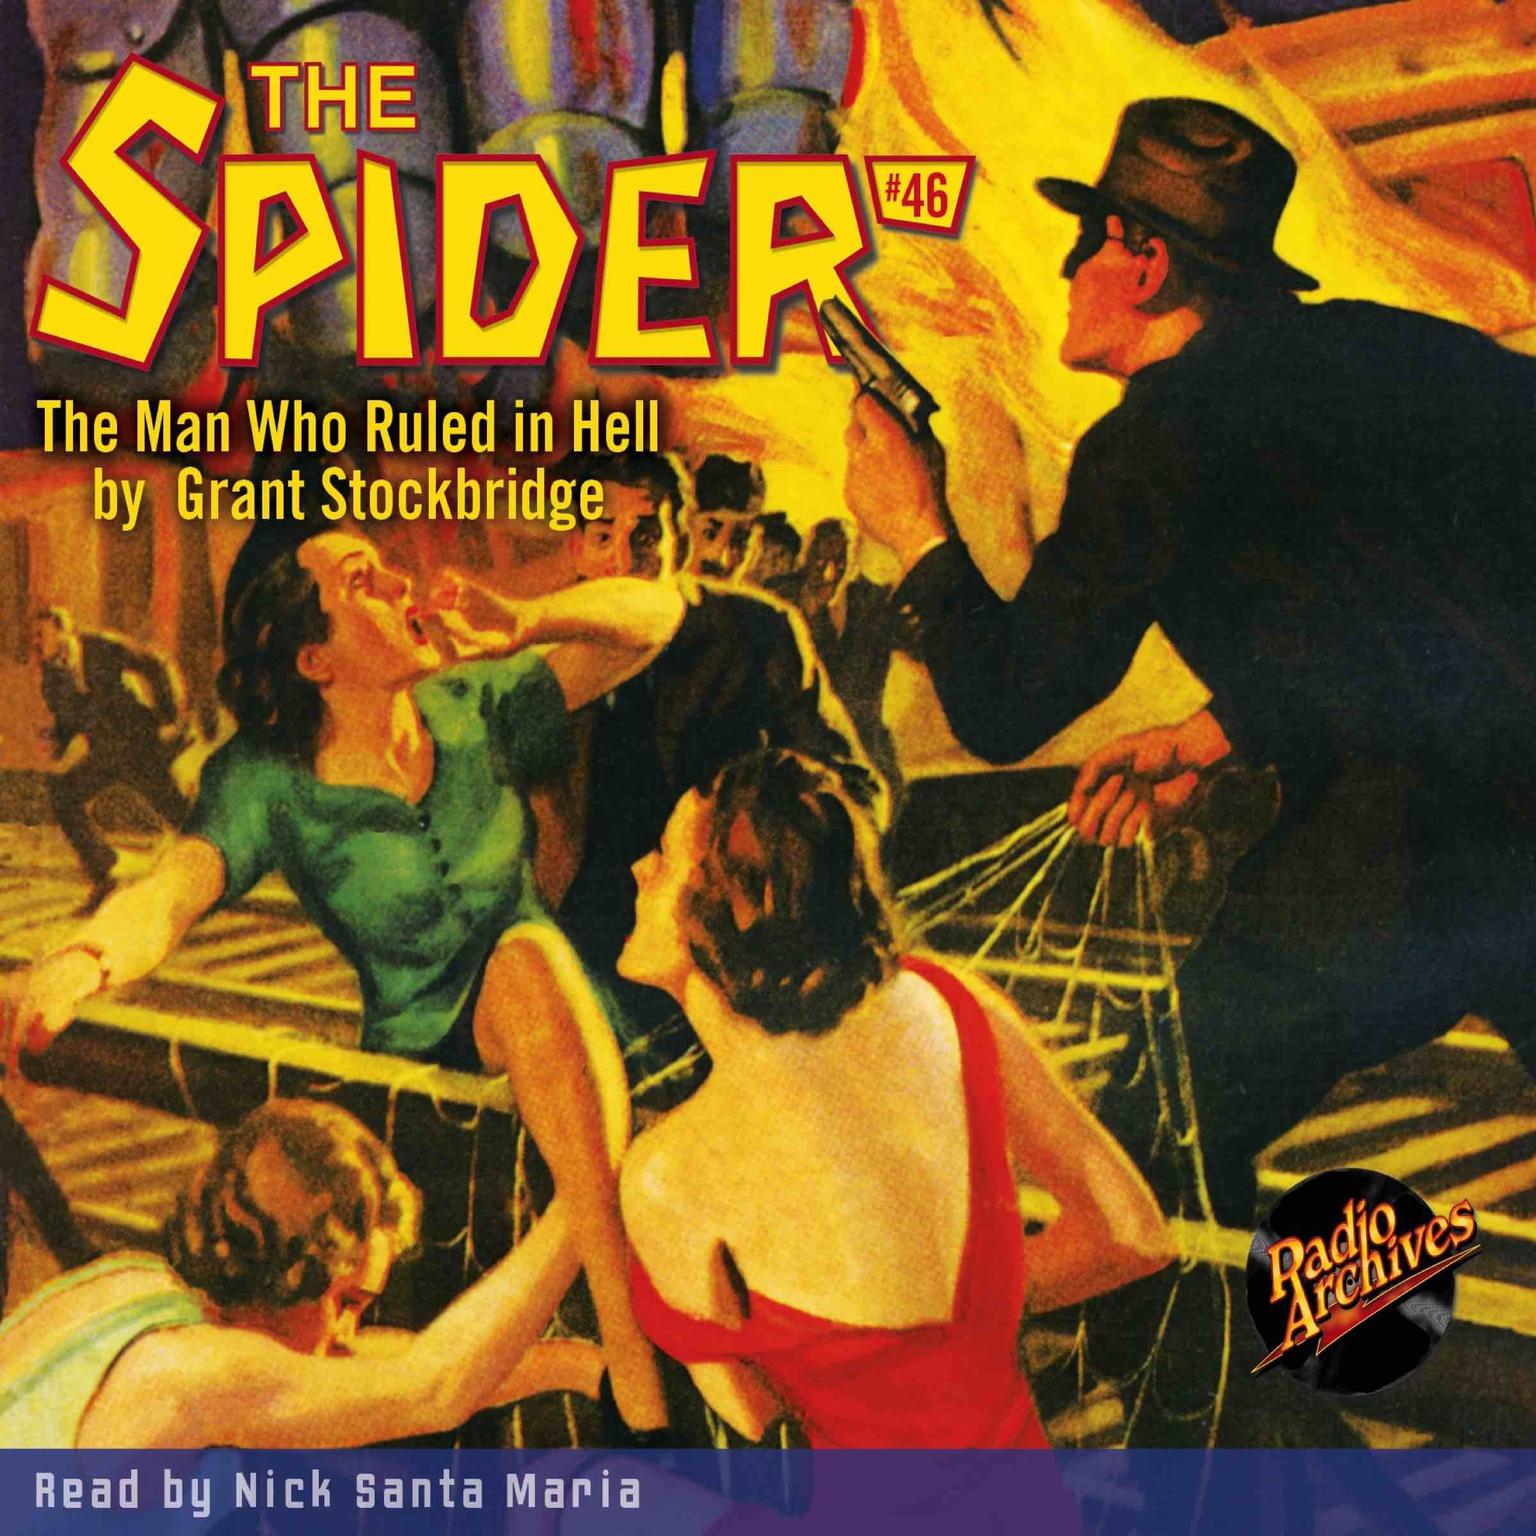 Spider #46, The: The Man Who Ruled in Hell Audiobook, by Grant Stockbridge